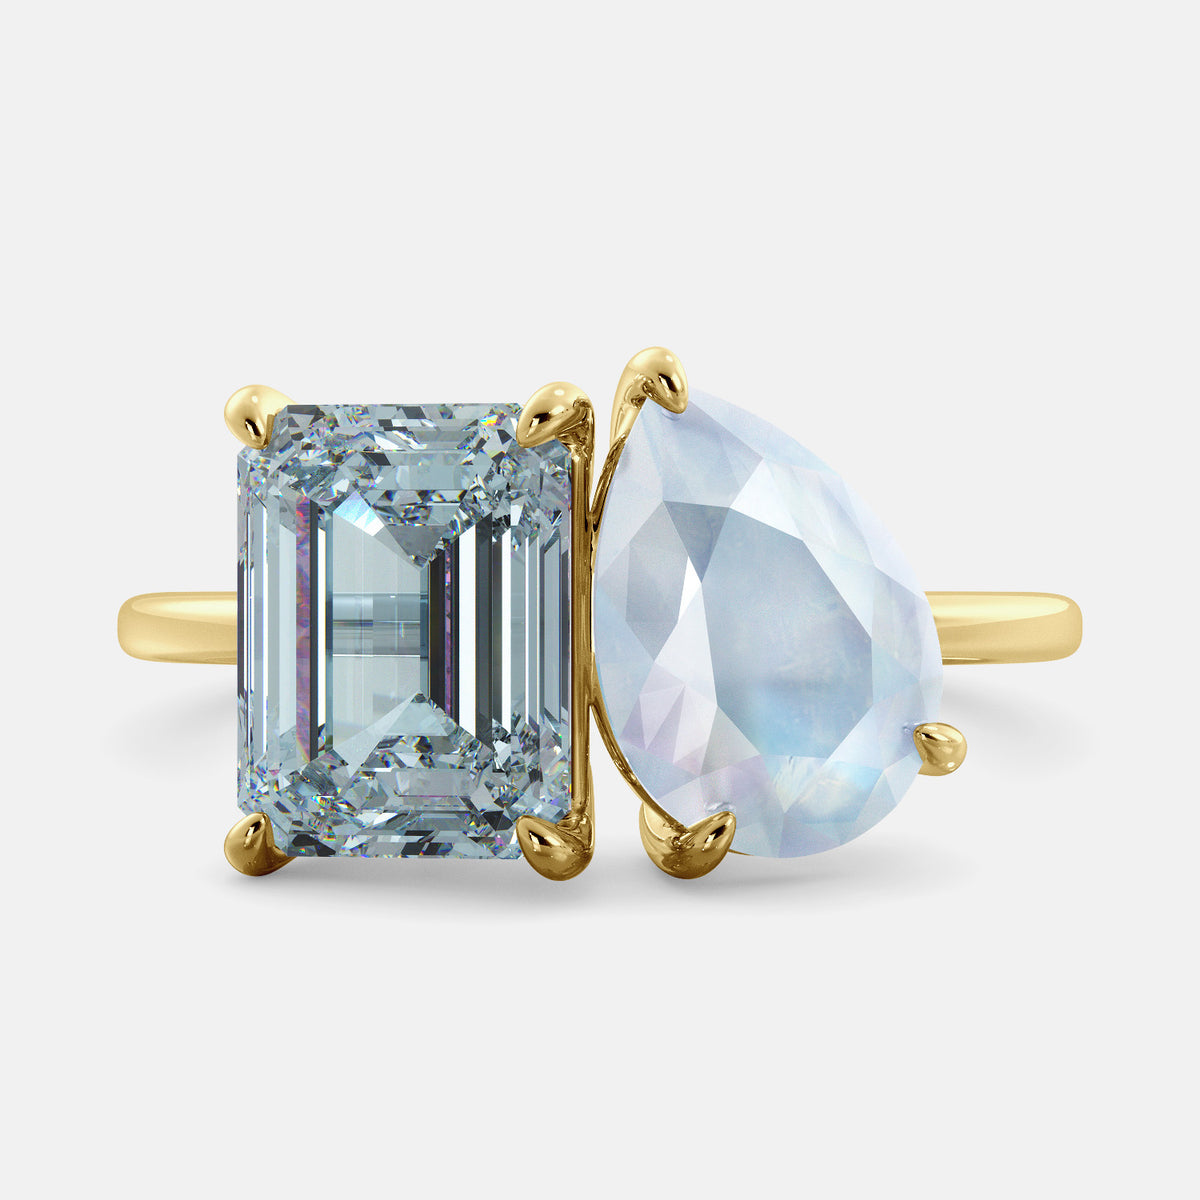 A toi et moi ring with an emerald-cut aquamarine and a pear-cut gemstone. The emerald-cut morganite is set on the left of the ring, and the pear-cut gemstone is set on the right. The ring is made of recycled yellow gold and has a simple, elegant design. The pear-cut gemstone can be customized. **Here are some additional details about the image:** * The emerald-cut aquamarine is a birthstone for March. * The pear-cut gemstone can be customized to any stone of your choice.